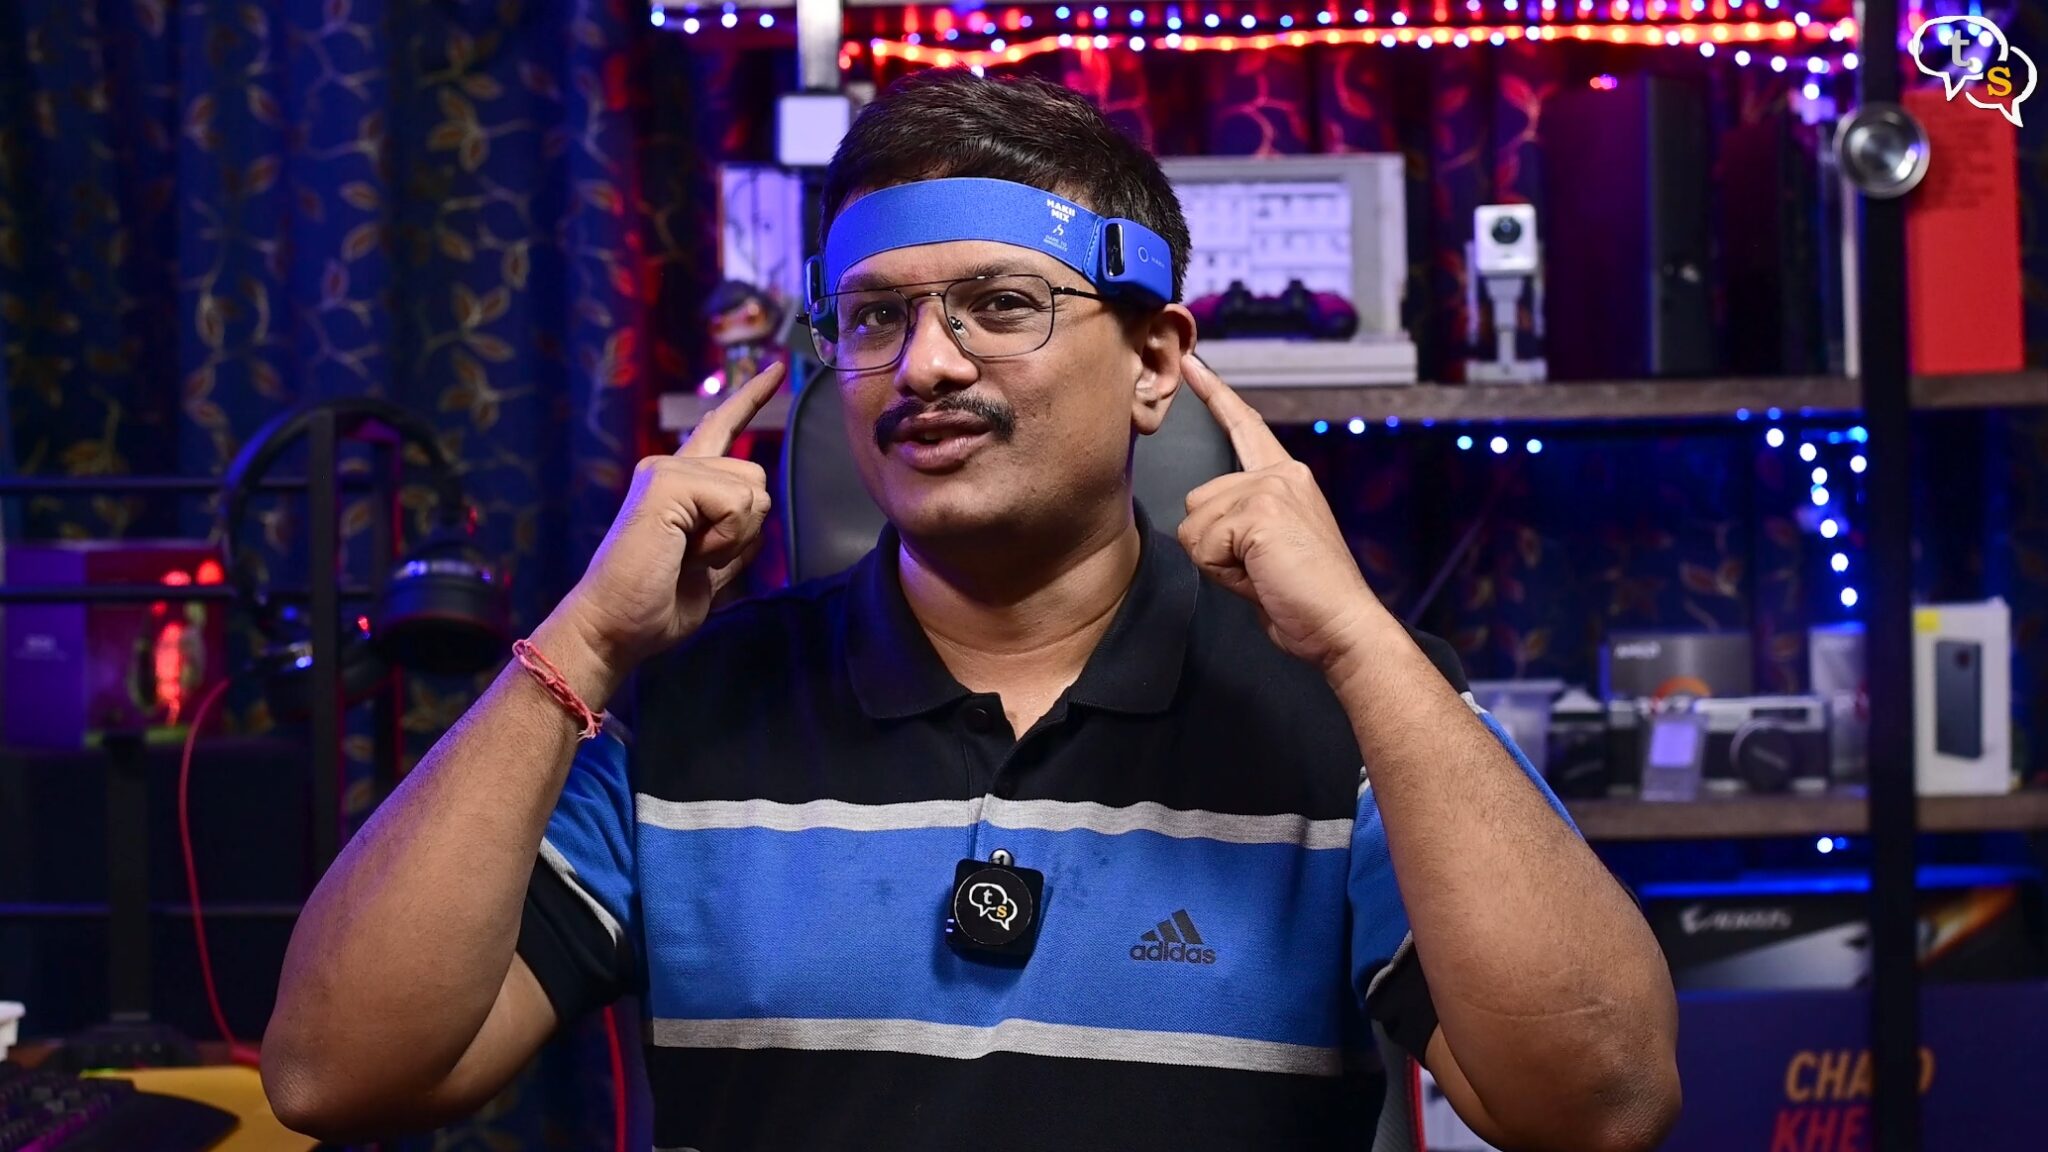 A person wearing a blue headband and glasses Description automatically generated with medium confidence